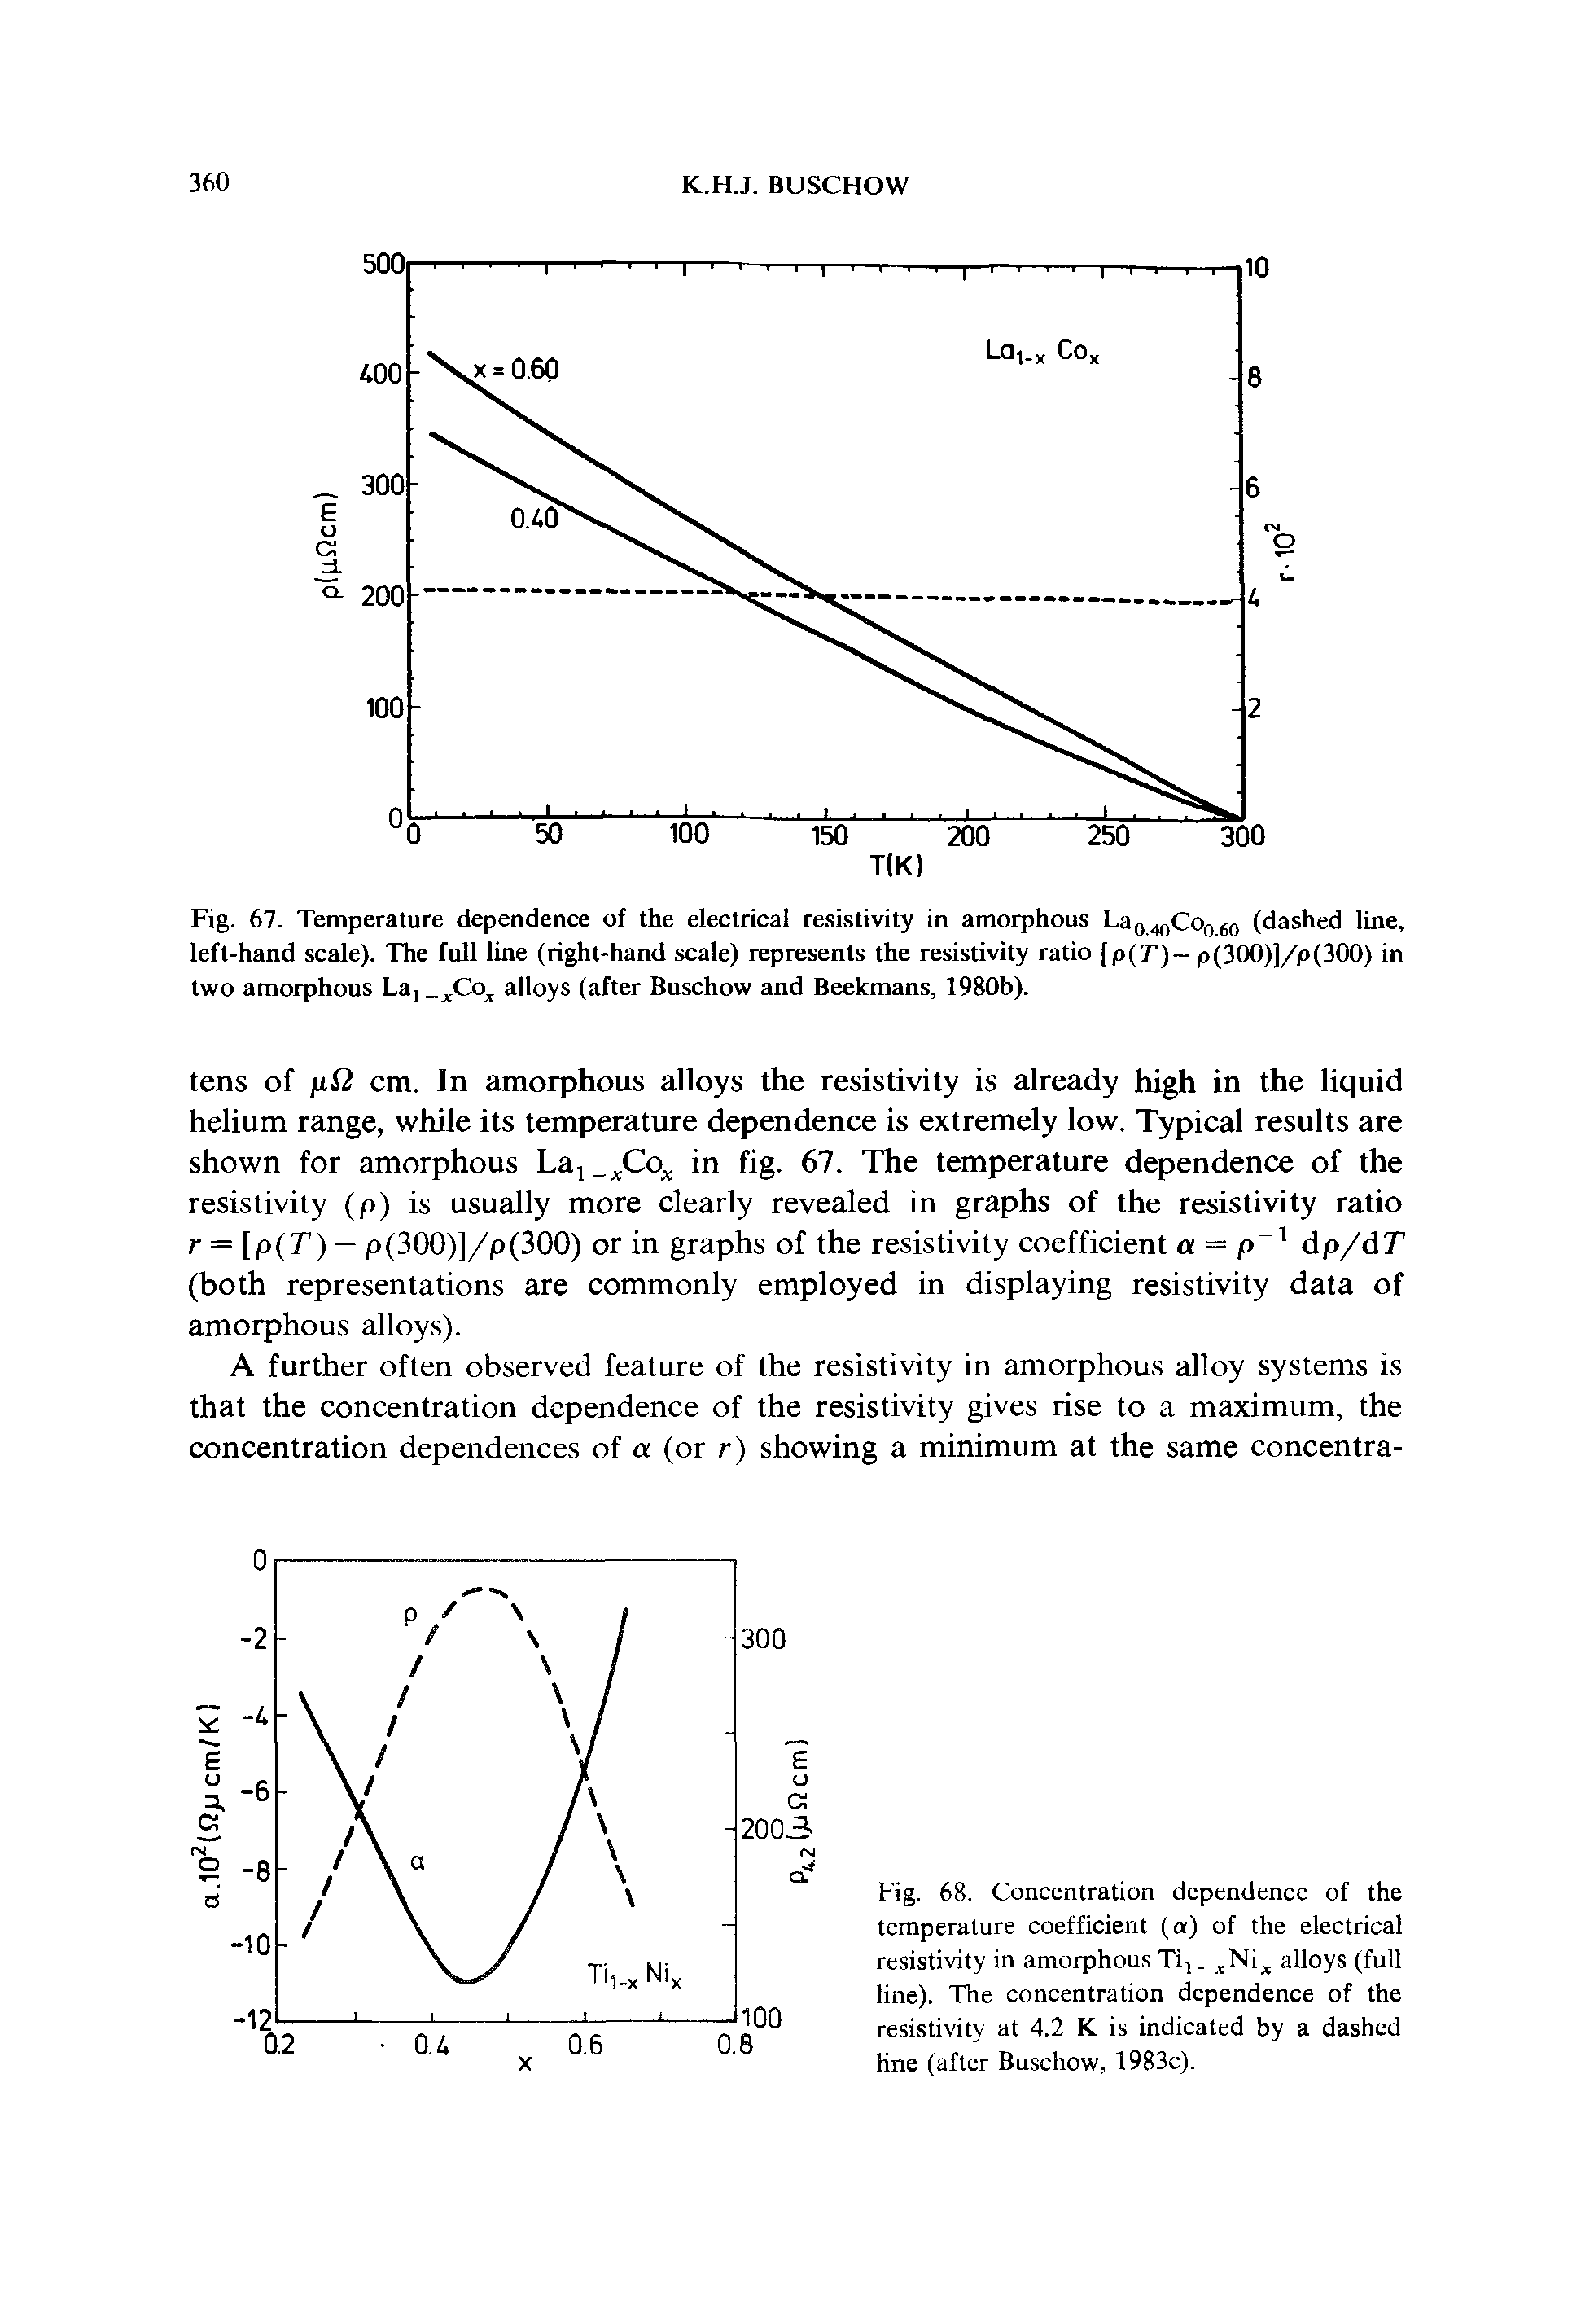 Fig. 68. Concentration dependence of the temperature coefficient (a) of the electrical resistivity in amorphous Ti, - Ni alloys (full line). The concentration dependence of the resistivity at 4.2 K is indicated by a dashed hne (after Buschow, 1983c).